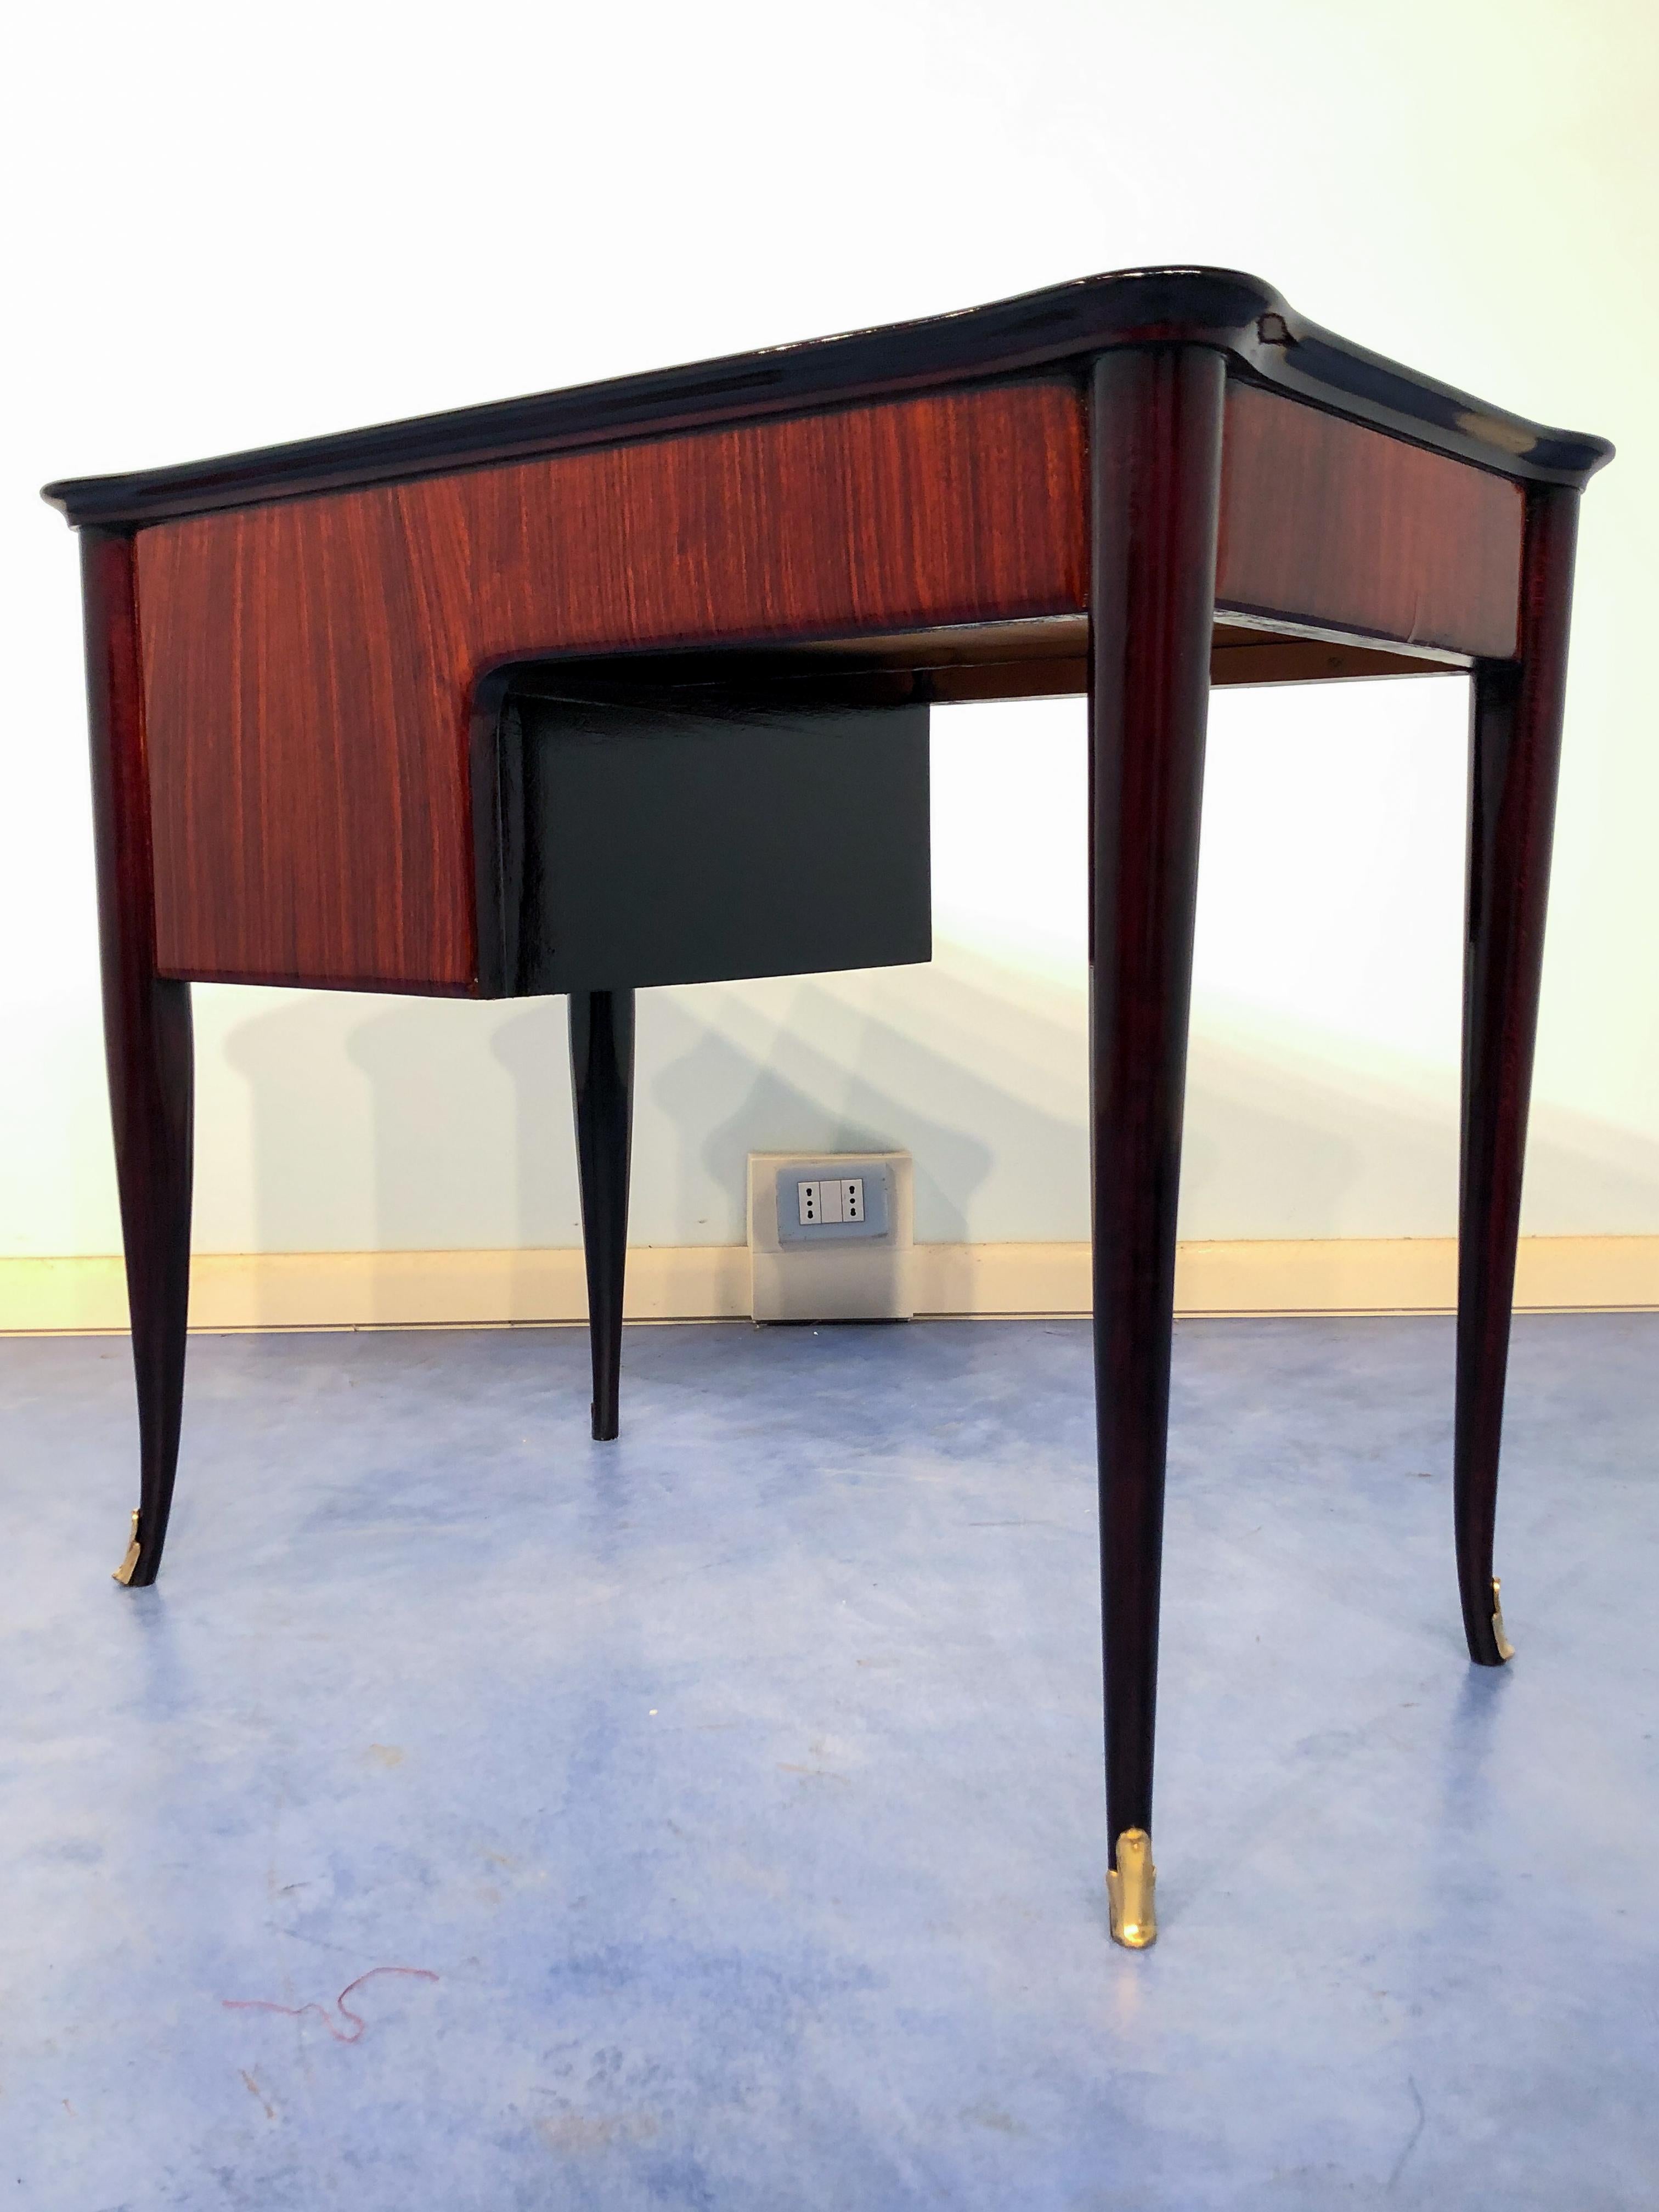 Italian Mid-Century Modern Small Desk and Chair Attributed to Paolo Buffa, 1950s For Sale 5